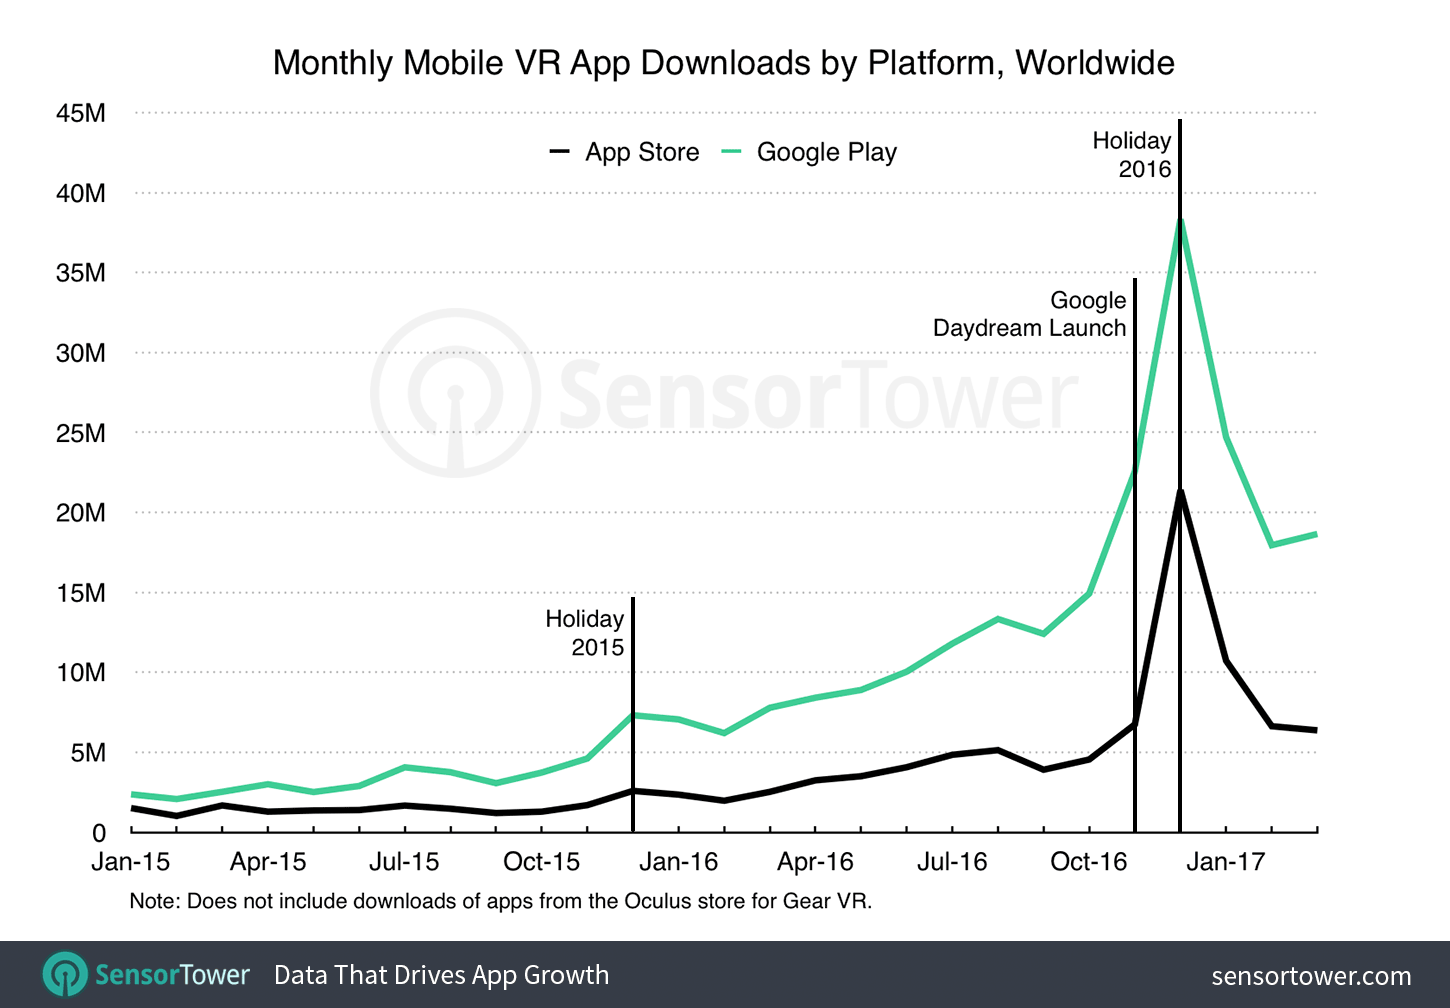 Monthly downloads of mobile VR apps on the Apple App Store and Google Play since January 2015